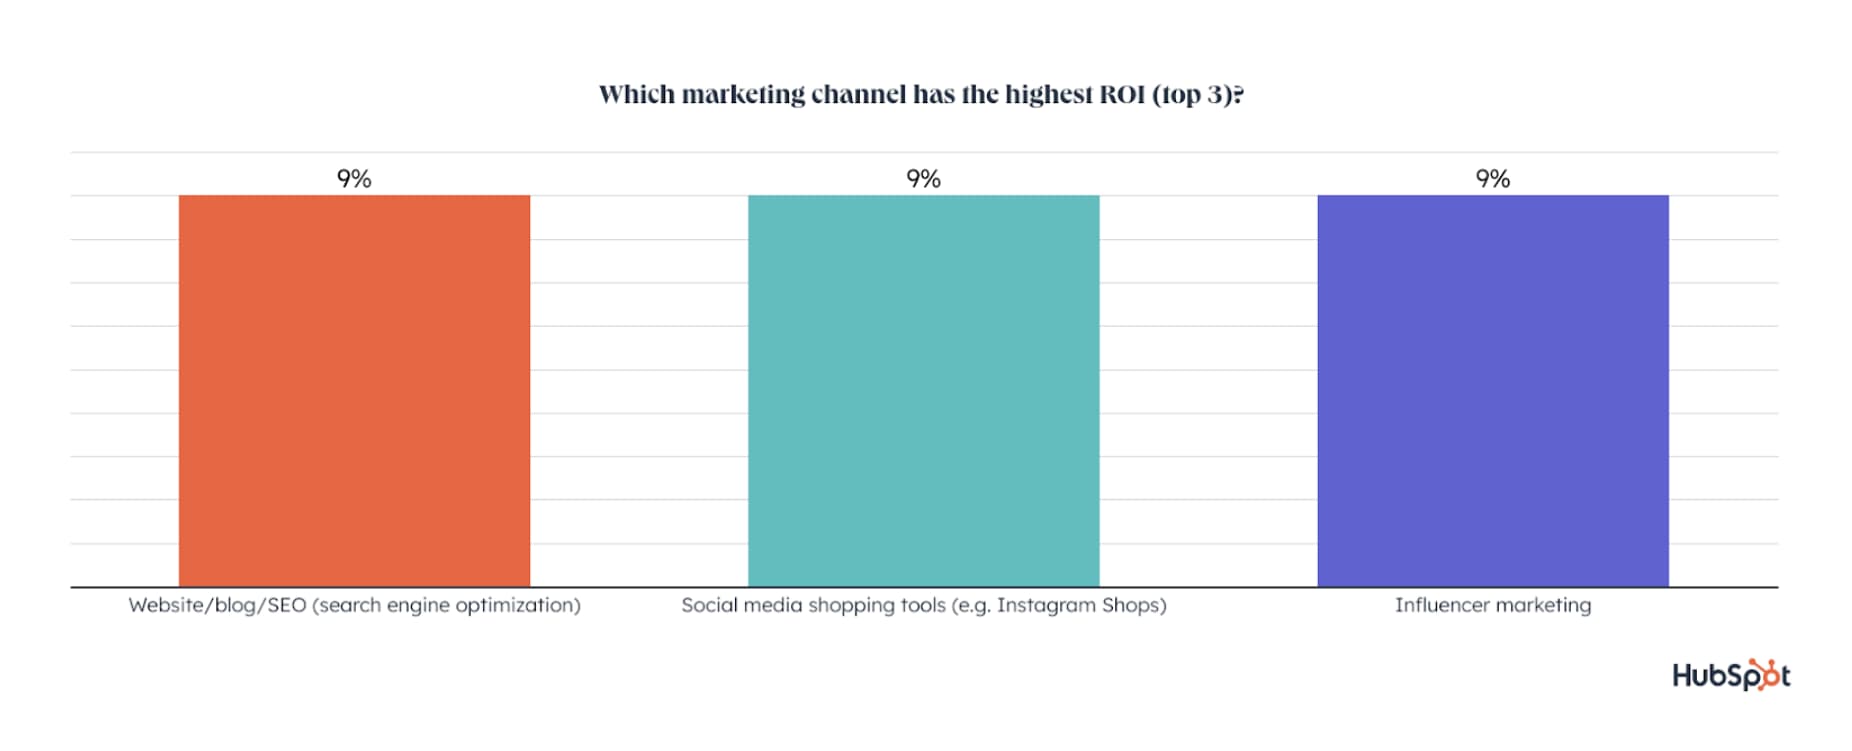 A chart graph showing blogging, social media shopping tools and influencer marketing all tied for highest ROI